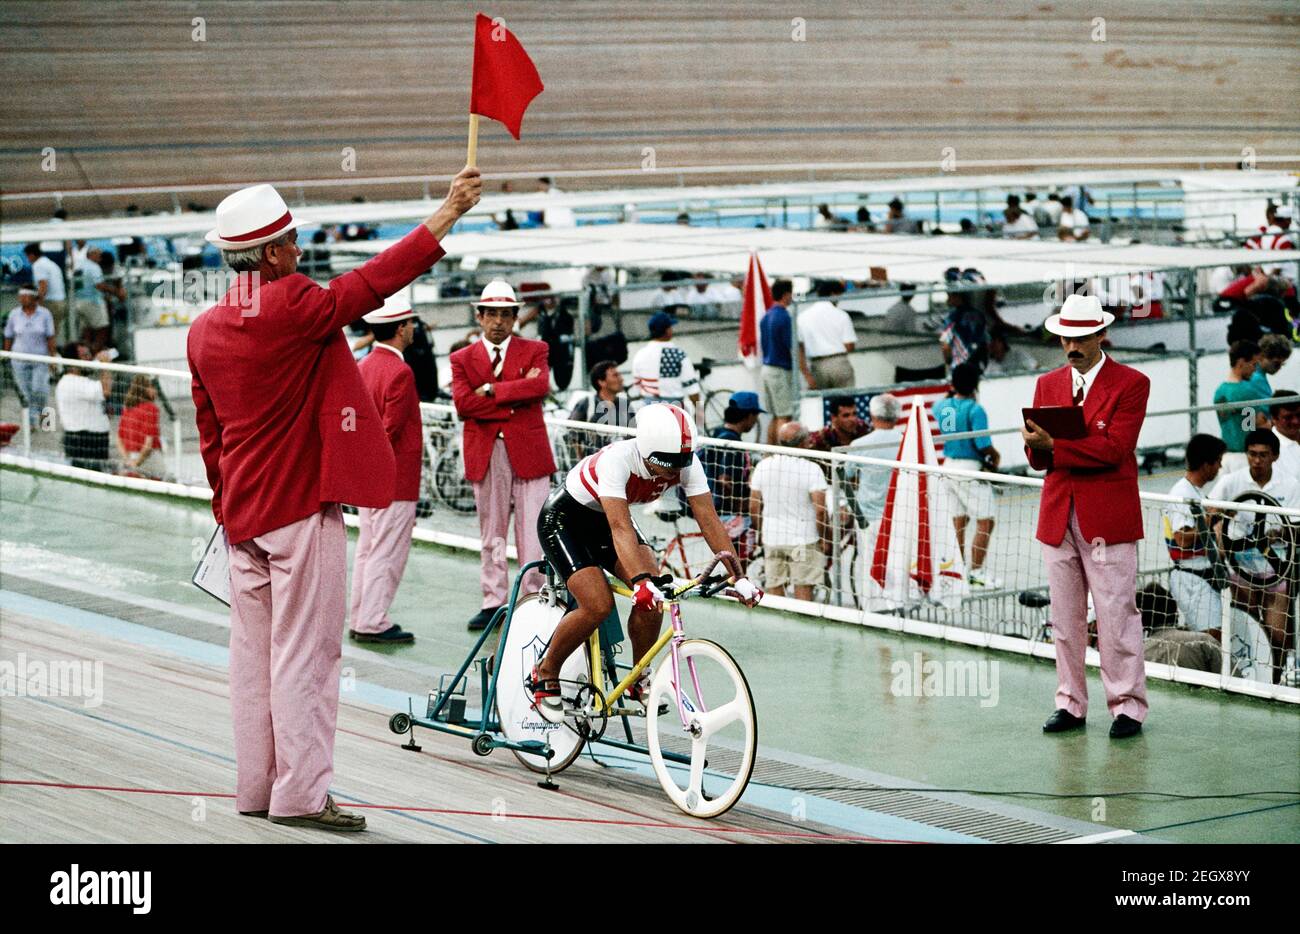 FILE : Seiko Hashimoto (JPN), 1992 - Cycling : Seiko Hashimoto of Japan in  action during the Women's Cycling competition at the 1992 Barcelona Olympic  Games in Barcelona, Spain. Credit: Koji Aoki/AFLO